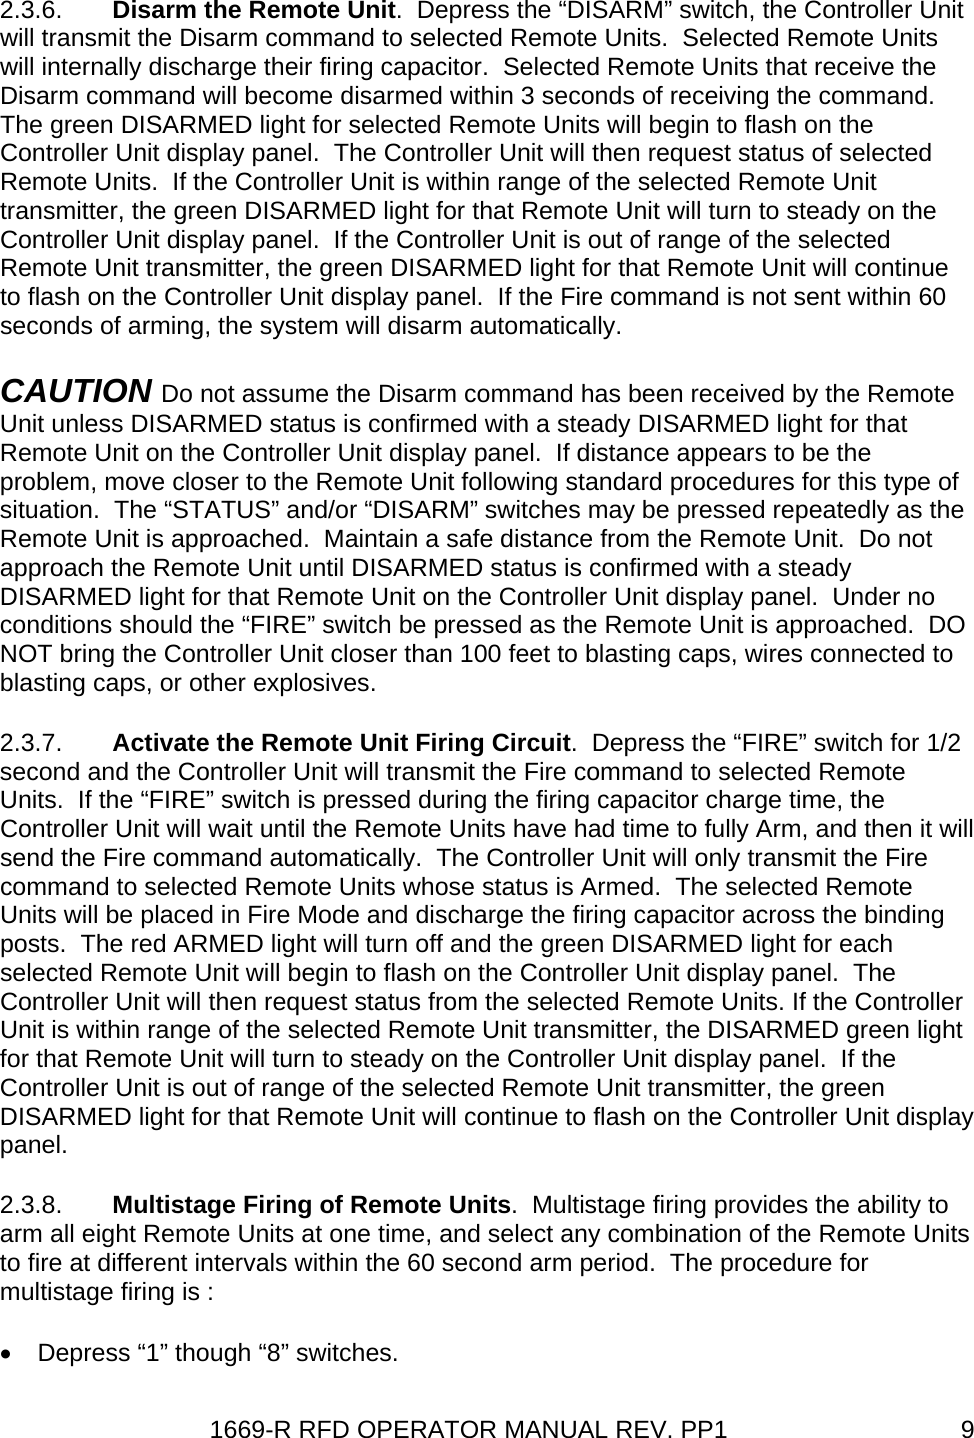 1669-R RFD OPERATOR MANUAL REV. PP1  92.3.6.  Disarm the Remote Unit.  Depress the “DISARM” switch, the Controller Unit will transmit the Disarm command to selected Remote Units.  Selected Remote Units will internally discharge their firing capacitor.  Selected Remote Units that receive the Disarm command will become disarmed within 3 seconds of receiving the command.  The green DISARMED light for selected Remote Units will begin to flash on the Controller Unit display panel.  The Controller Unit will then request status of selected Remote Units.  If the Controller Unit is within range of the selected Remote Unit transmitter, the green DISARMED light for that Remote Unit will turn to steady on the Controller Unit display panel.  If the Controller Unit is out of range of the selected Remote Unit transmitter, the green DISARMED light for that Remote Unit will continue to flash on the Controller Unit display panel.  If the Fire command is not sent within 60 seconds of arming, the system will disarm automatically. CAUTION Do not assume the Disarm command has been received by the Remote Unit unless DISARMED status is confirmed with a steady DISARMED light for that Remote Unit on the Controller Unit display panel.  If distance appears to be the problem, move closer to the Remote Unit following standard procedures for this type of situation.  The “STATUS” and/or “DISARM” switches may be pressed repeatedly as the Remote Unit is approached.  Maintain a safe distance from the Remote Unit.  Do not approach the Remote Unit until DISARMED status is confirmed with a steady DISARMED light for that Remote Unit on the Controller Unit display panel.  Under no conditions should the “FIRE” switch be pressed as the Remote Unit is approached.  DO NOT bring the Controller Unit closer than 100 feet to blasting caps, wires connected to blasting caps, or other explosives. 2.3.7.  Activate the Remote Unit Firing Circuit.  Depress the “FIRE” switch for 1/2 second and the Controller Unit will transmit the Fire command to selected Remote Units.  If the “FIRE” switch is pressed during the firing capacitor charge time, the Controller Unit will wait until the Remote Units have had time to fully Arm, and then it will send the Fire command automatically.  The Controller Unit will only transmit the Fire command to selected Remote Units whose status is Armed.  The selected Remote Units will be placed in Fire Mode and discharge the firing capacitor across the binding posts.  The red ARMED light will turn off and the green DISARMED light for each selected Remote Unit will begin to flash on the Controller Unit display panel.  The Controller Unit will then request status from the selected Remote Units. If the Controller Unit is within range of the selected Remote Unit transmitter, the DISARMED green light for that Remote Unit will turn to steady on the Controller Unit display panel.  If the Controller Unit is out of range of the selected Remote Unit transmitter, the green DISARMED light for that Remote Unit will continue to flash on the Controller Unit display panel. 2.3.8.  Multistage Firing of Remote Units.  Multistage firing provides the ability to arm all eight Remote Units at one time, and select any combination of the Remote Units to fire at different intervals within the 60 second arm period.  The procedure for multistage firing is : •  Depress “1” though “8” switches. 